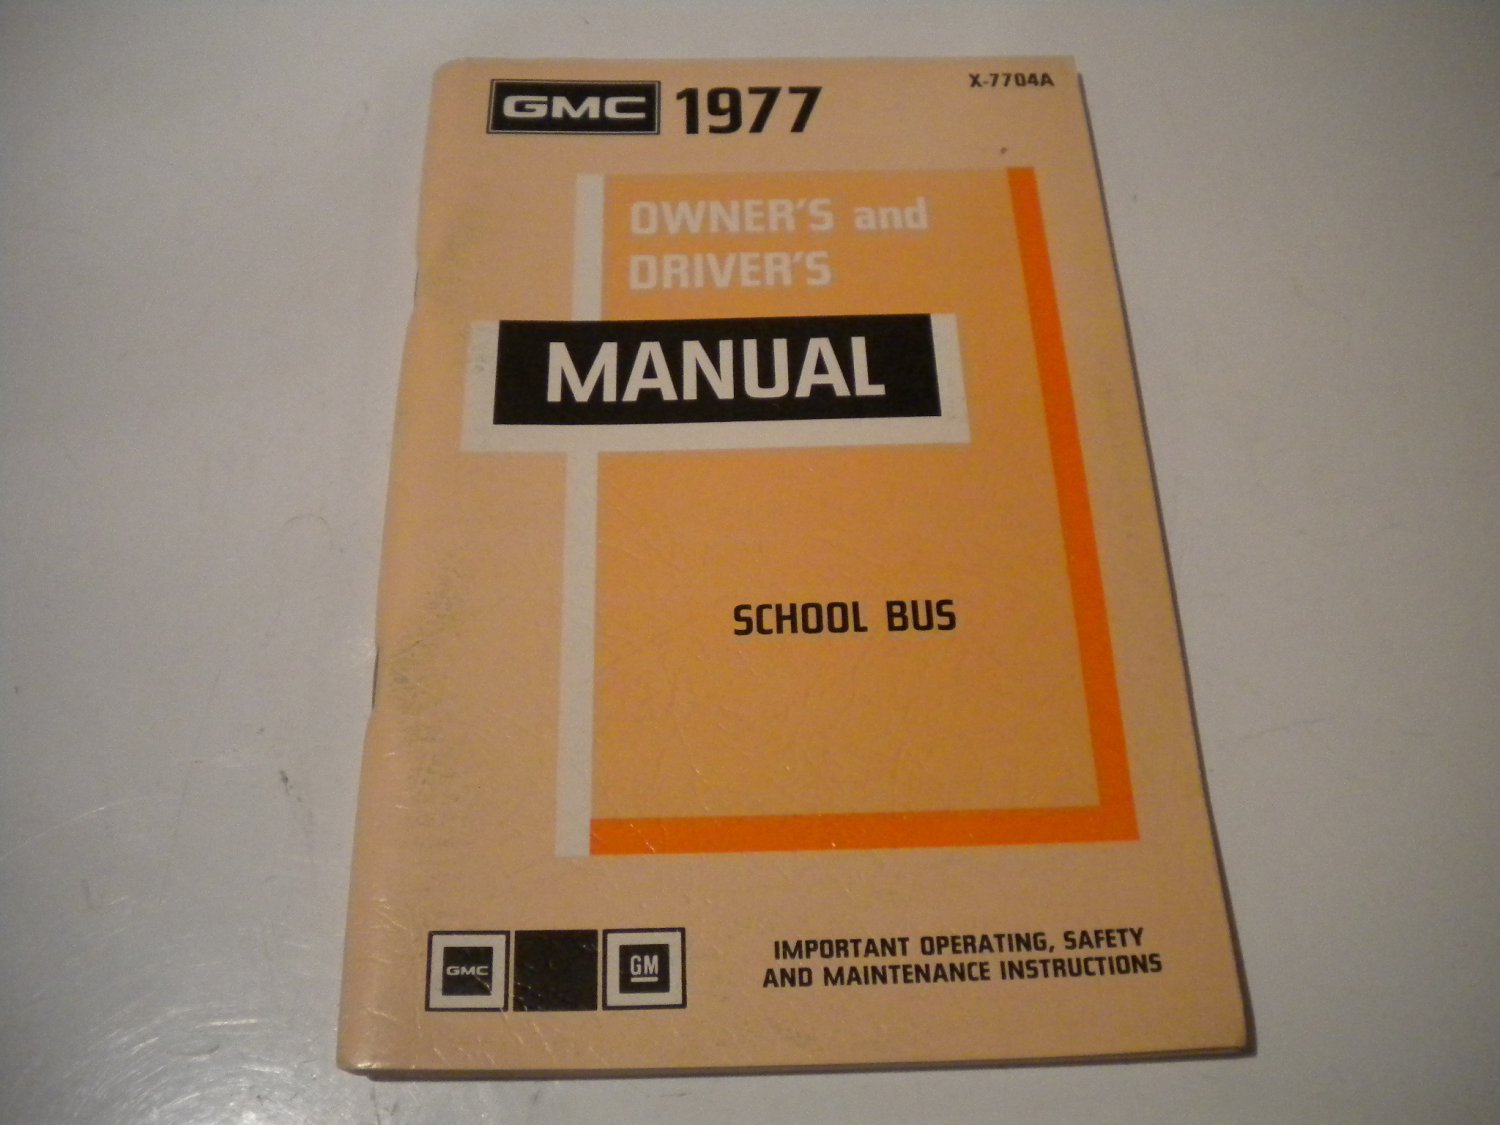 1977 GMC Owner's and Driver's Manual School Bus Owners Drivers Guide